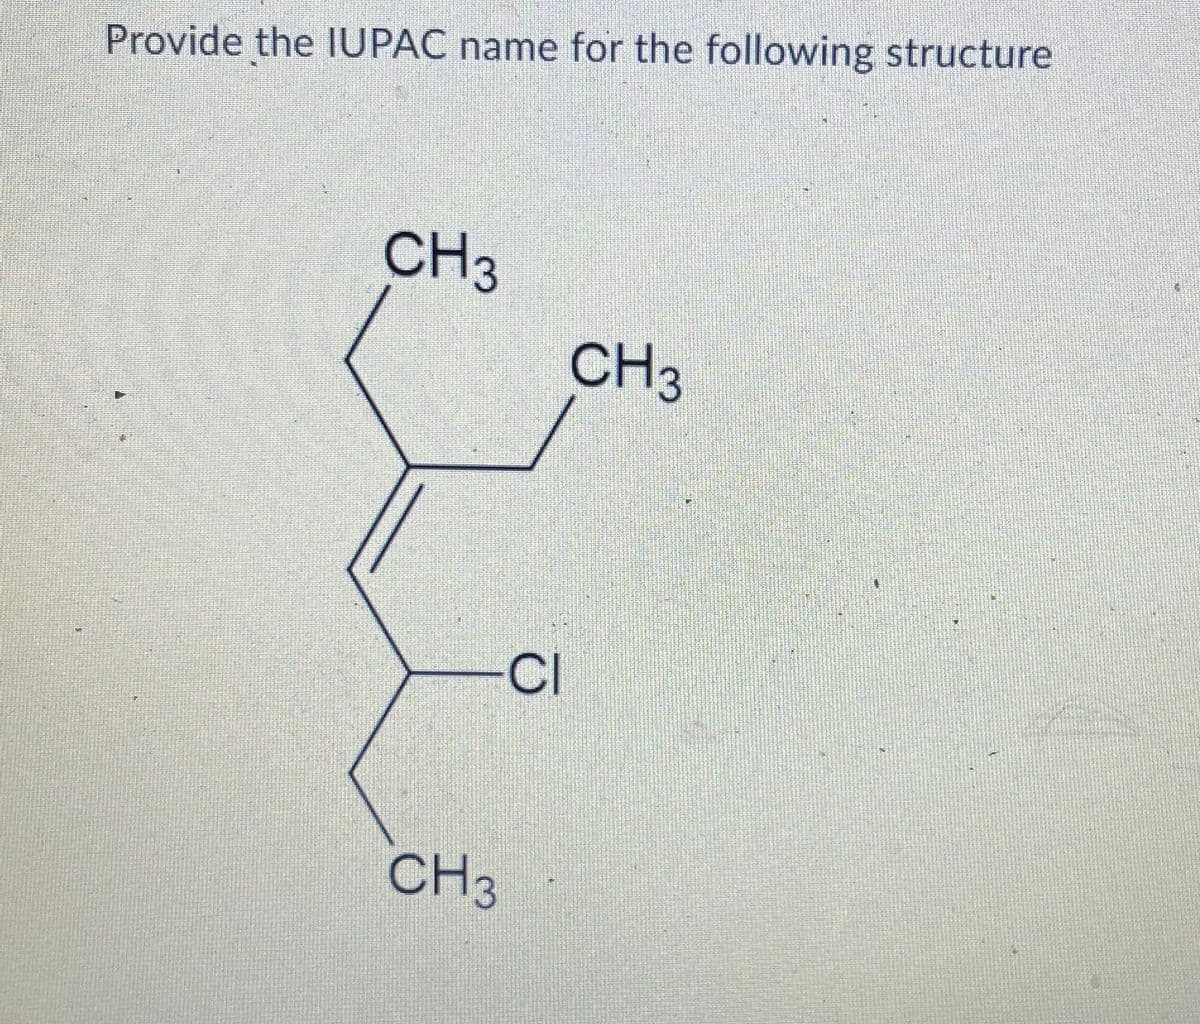 Provide the IUPAC name for the following structure
CH3
CH3
CI
CH3
